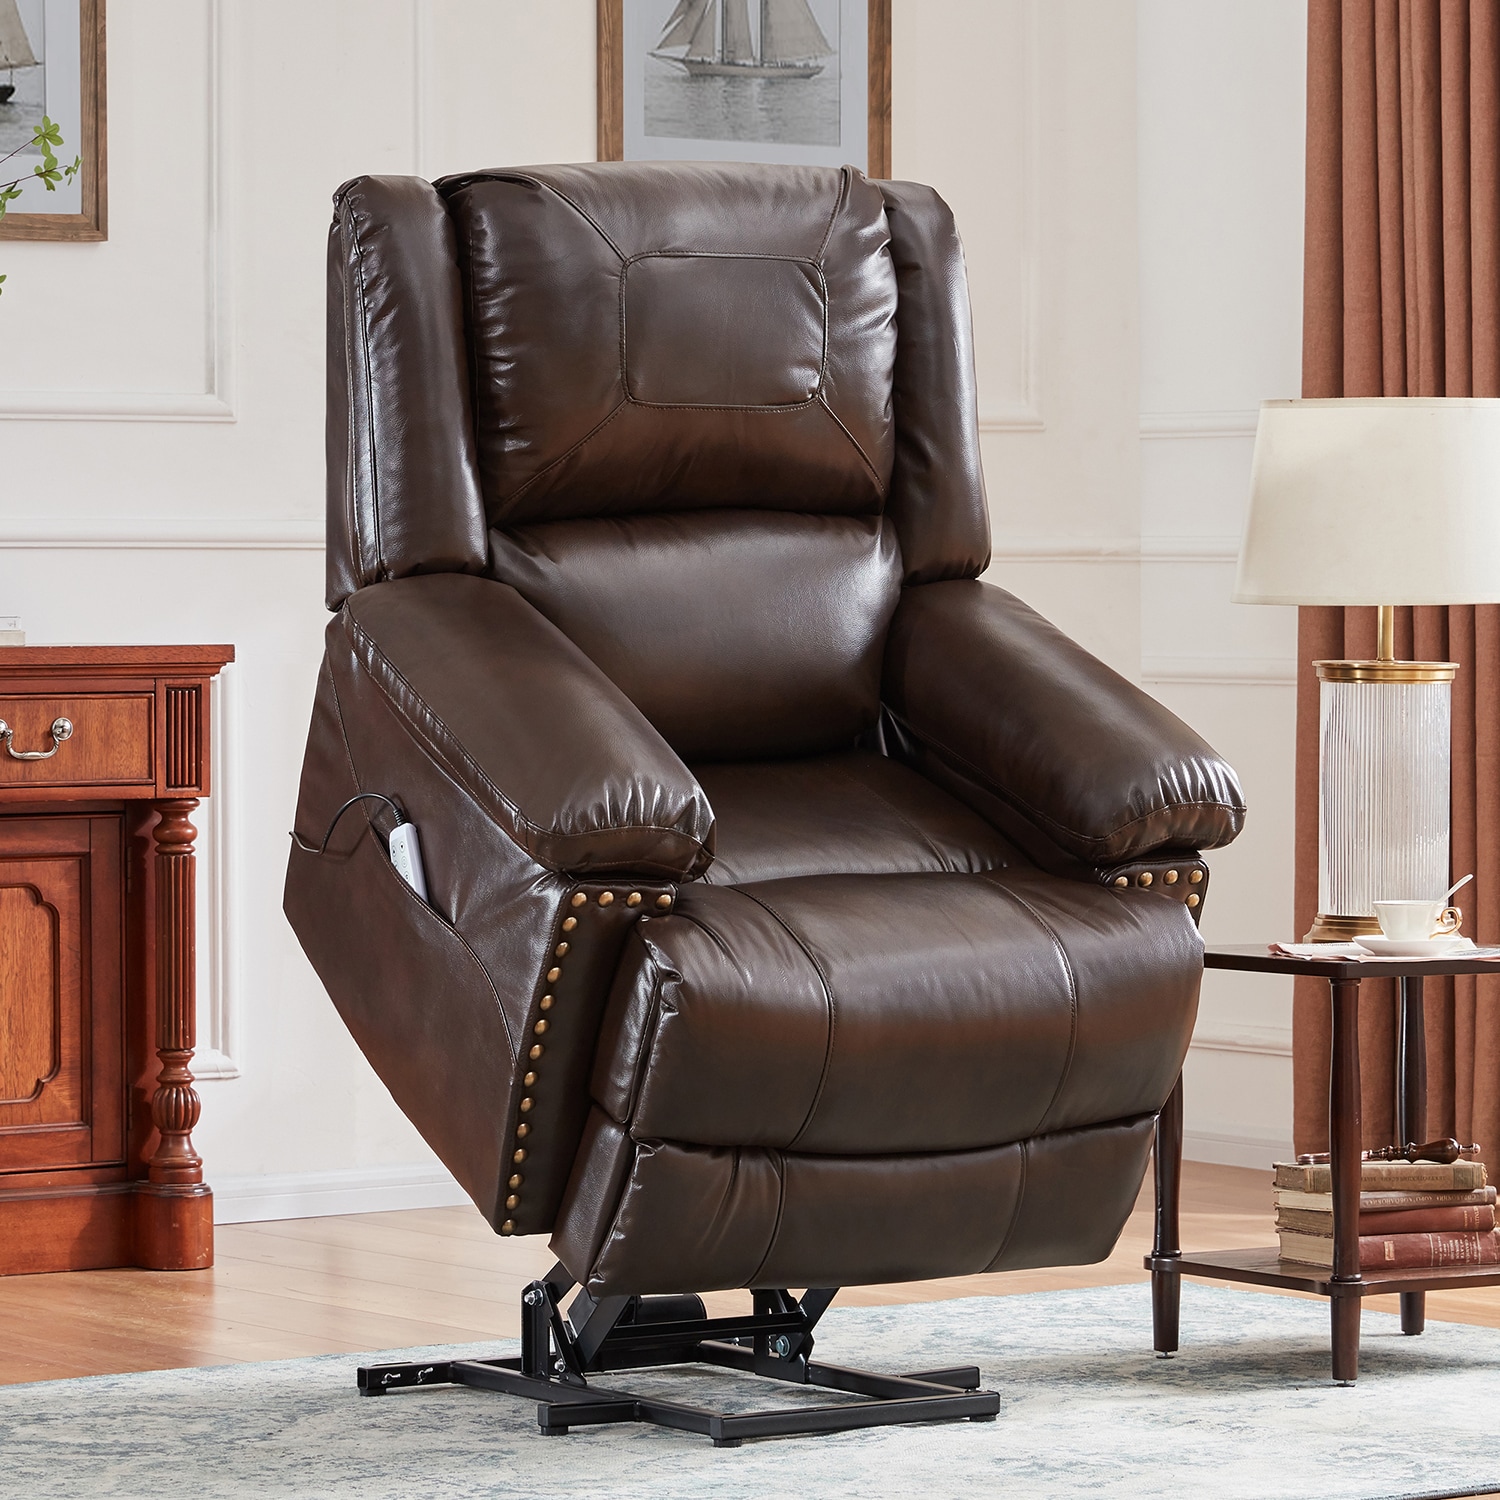 Massage Recliner PU Leather Sofa Chair for Elderly, Padded Seat Cushions  Chair with Heating and Massage Vibrating Function, Reclines to 150 Degrees,  Extending Footrest, Brown 